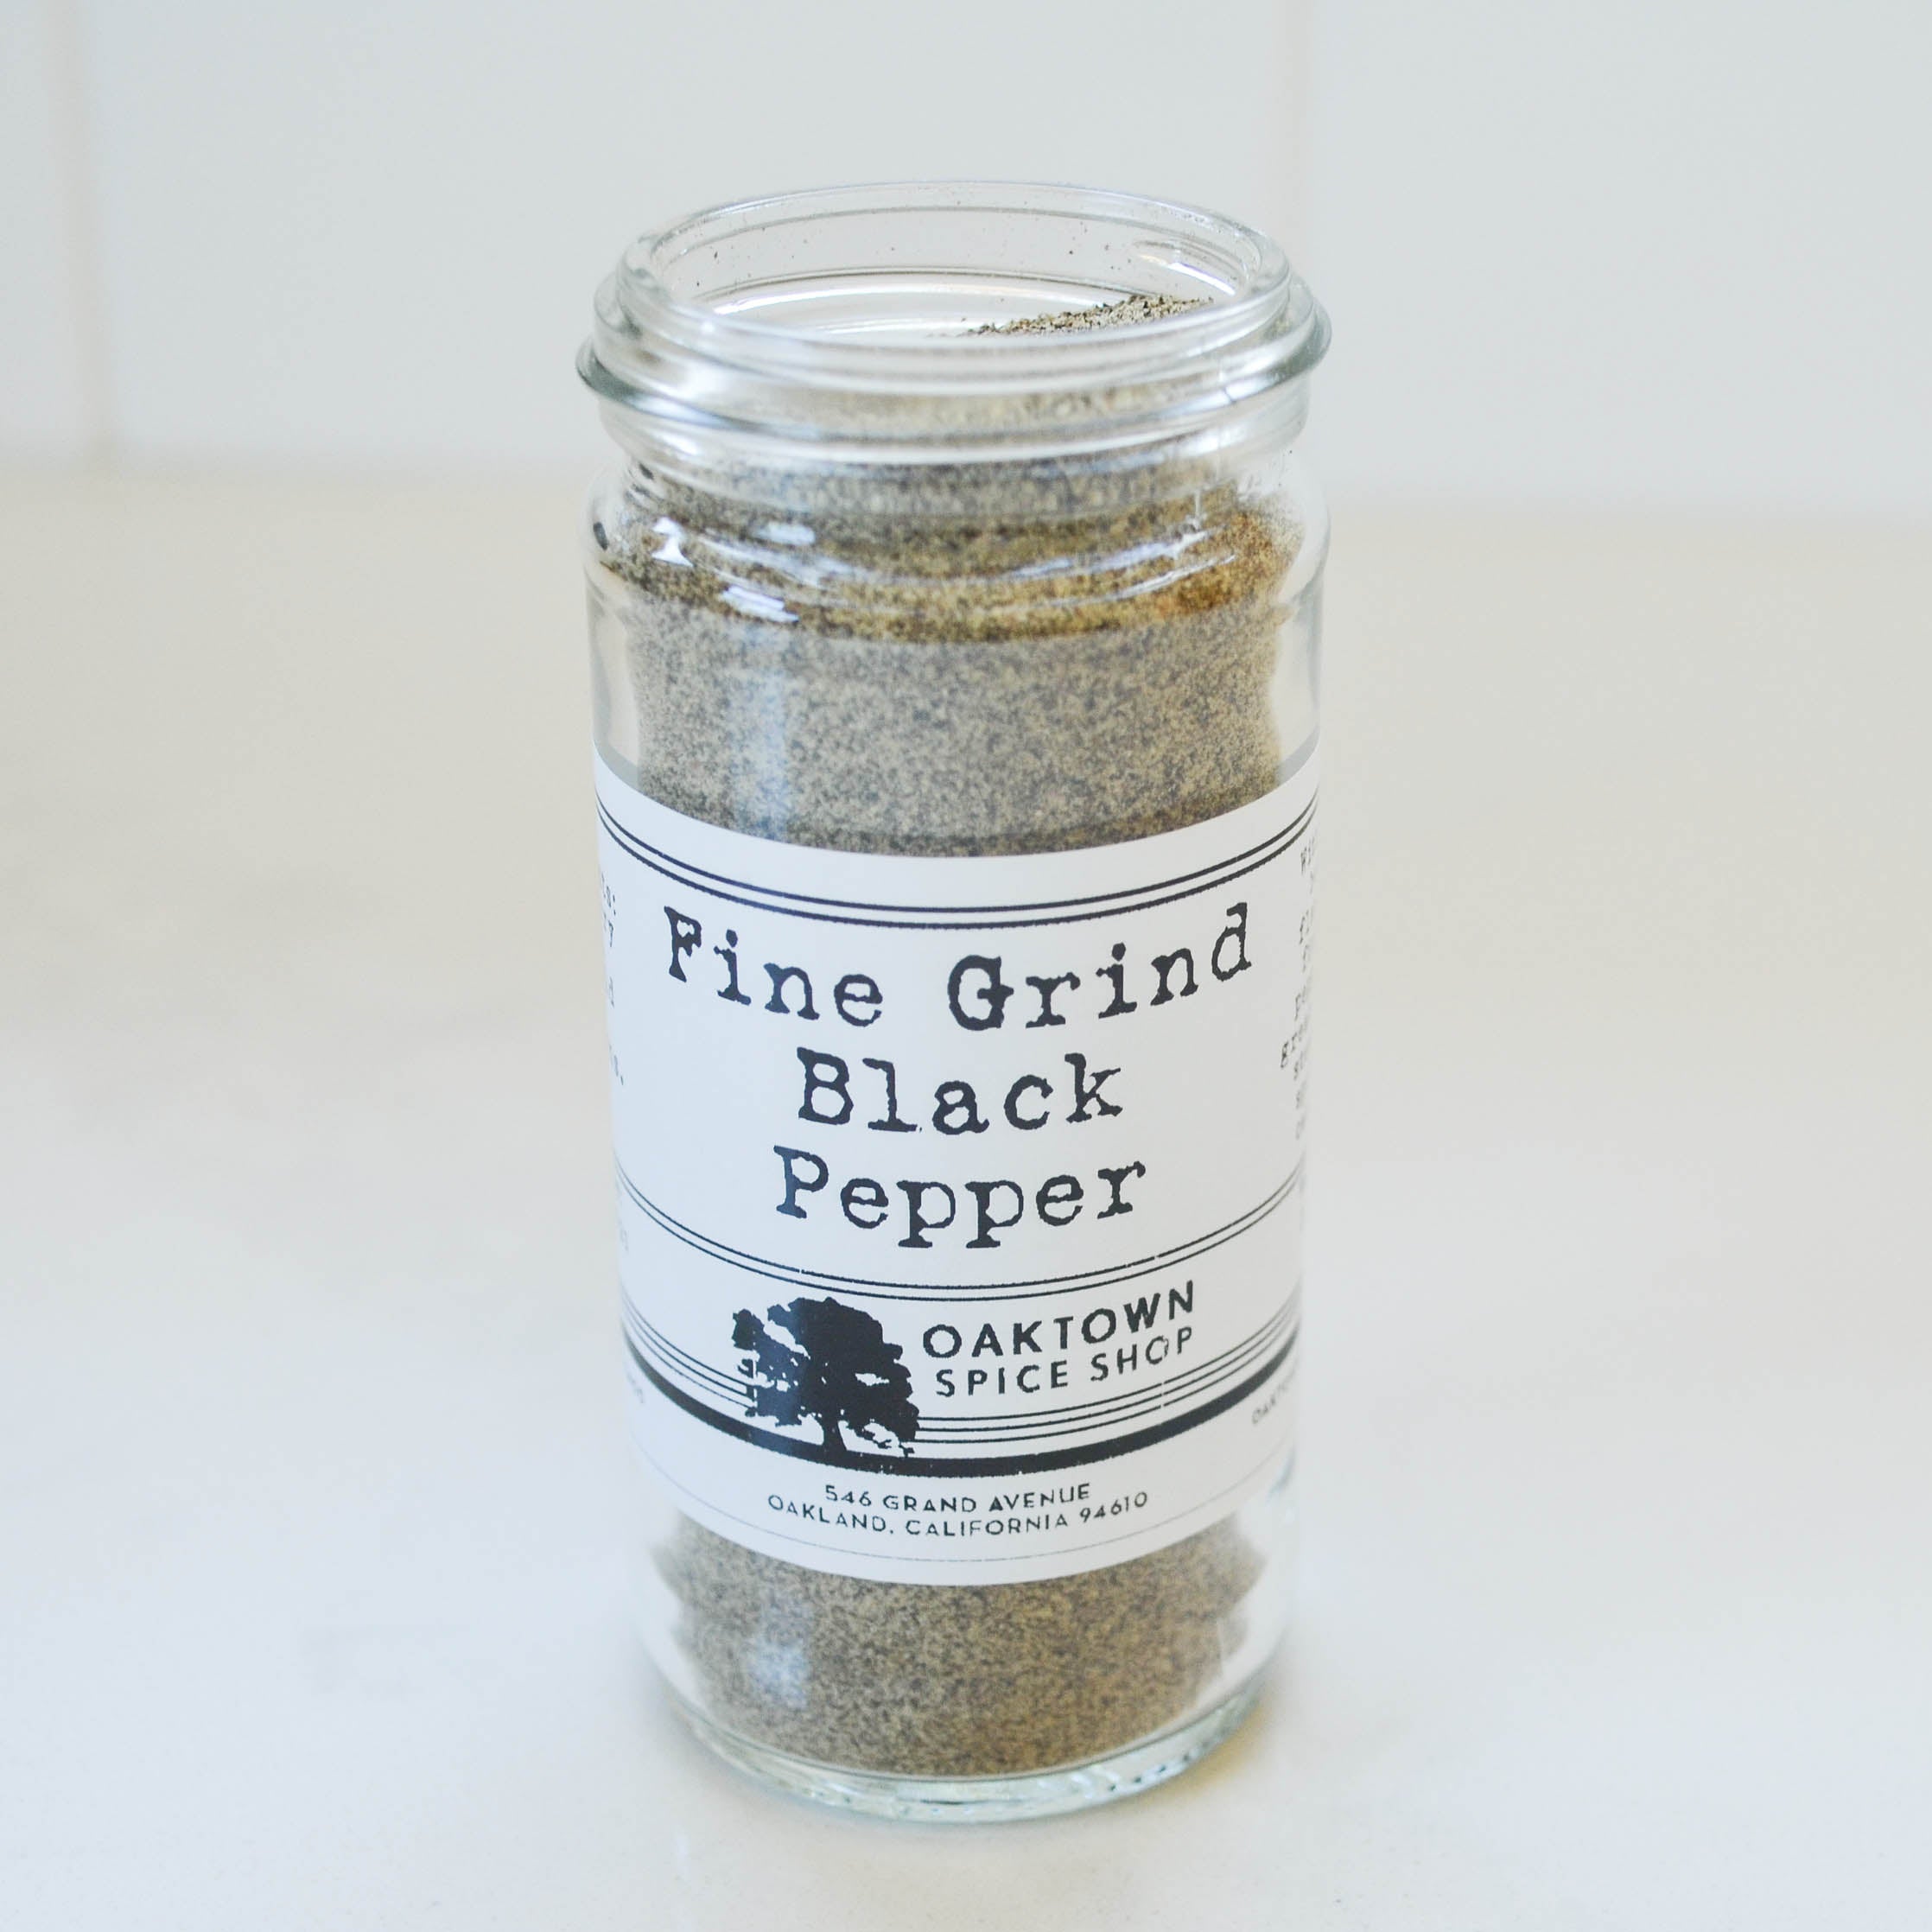 Fine Grind Black Pepper with Heat and Flavor at Oaktown Spice Shop